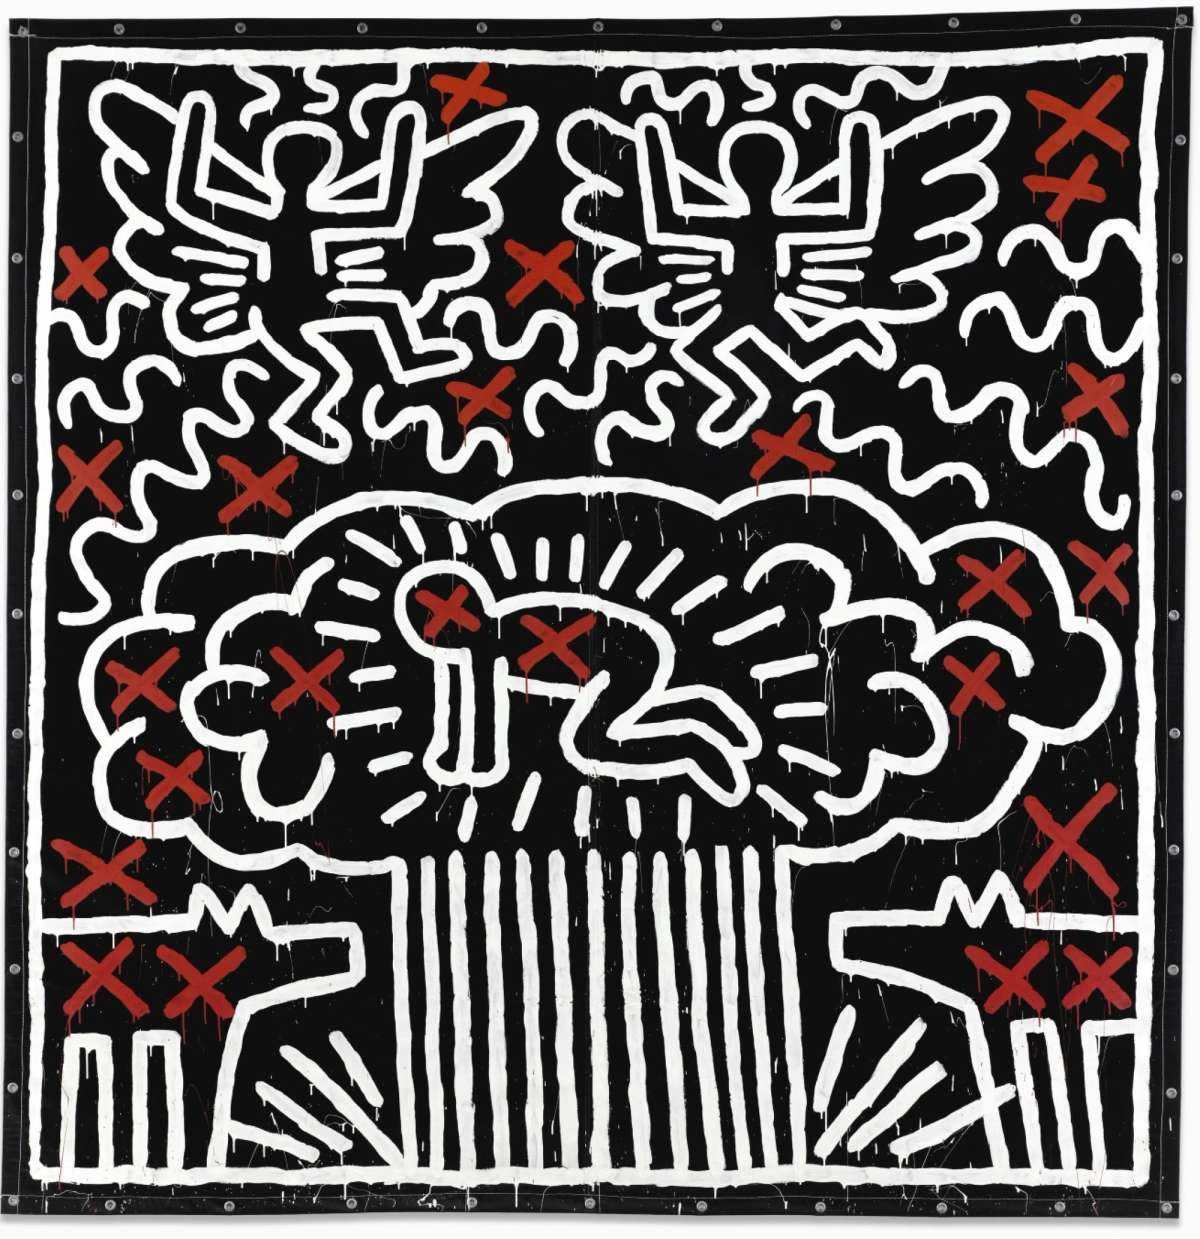 Untitled © Keith Haring 1982